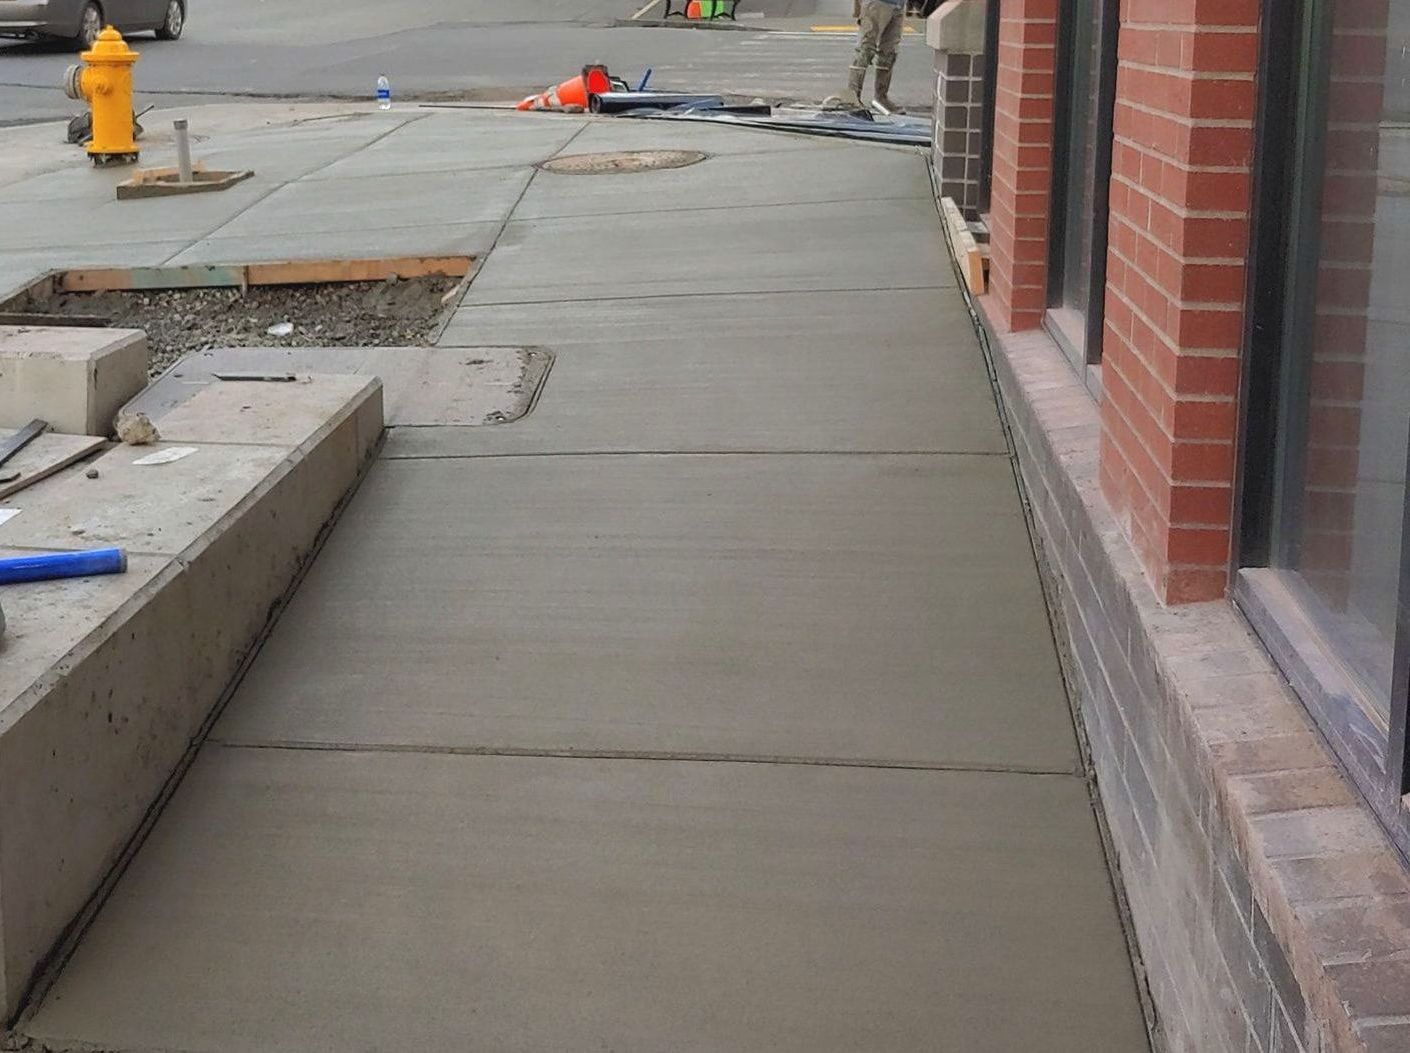 A sidewalk is being built next to a fire hydrant